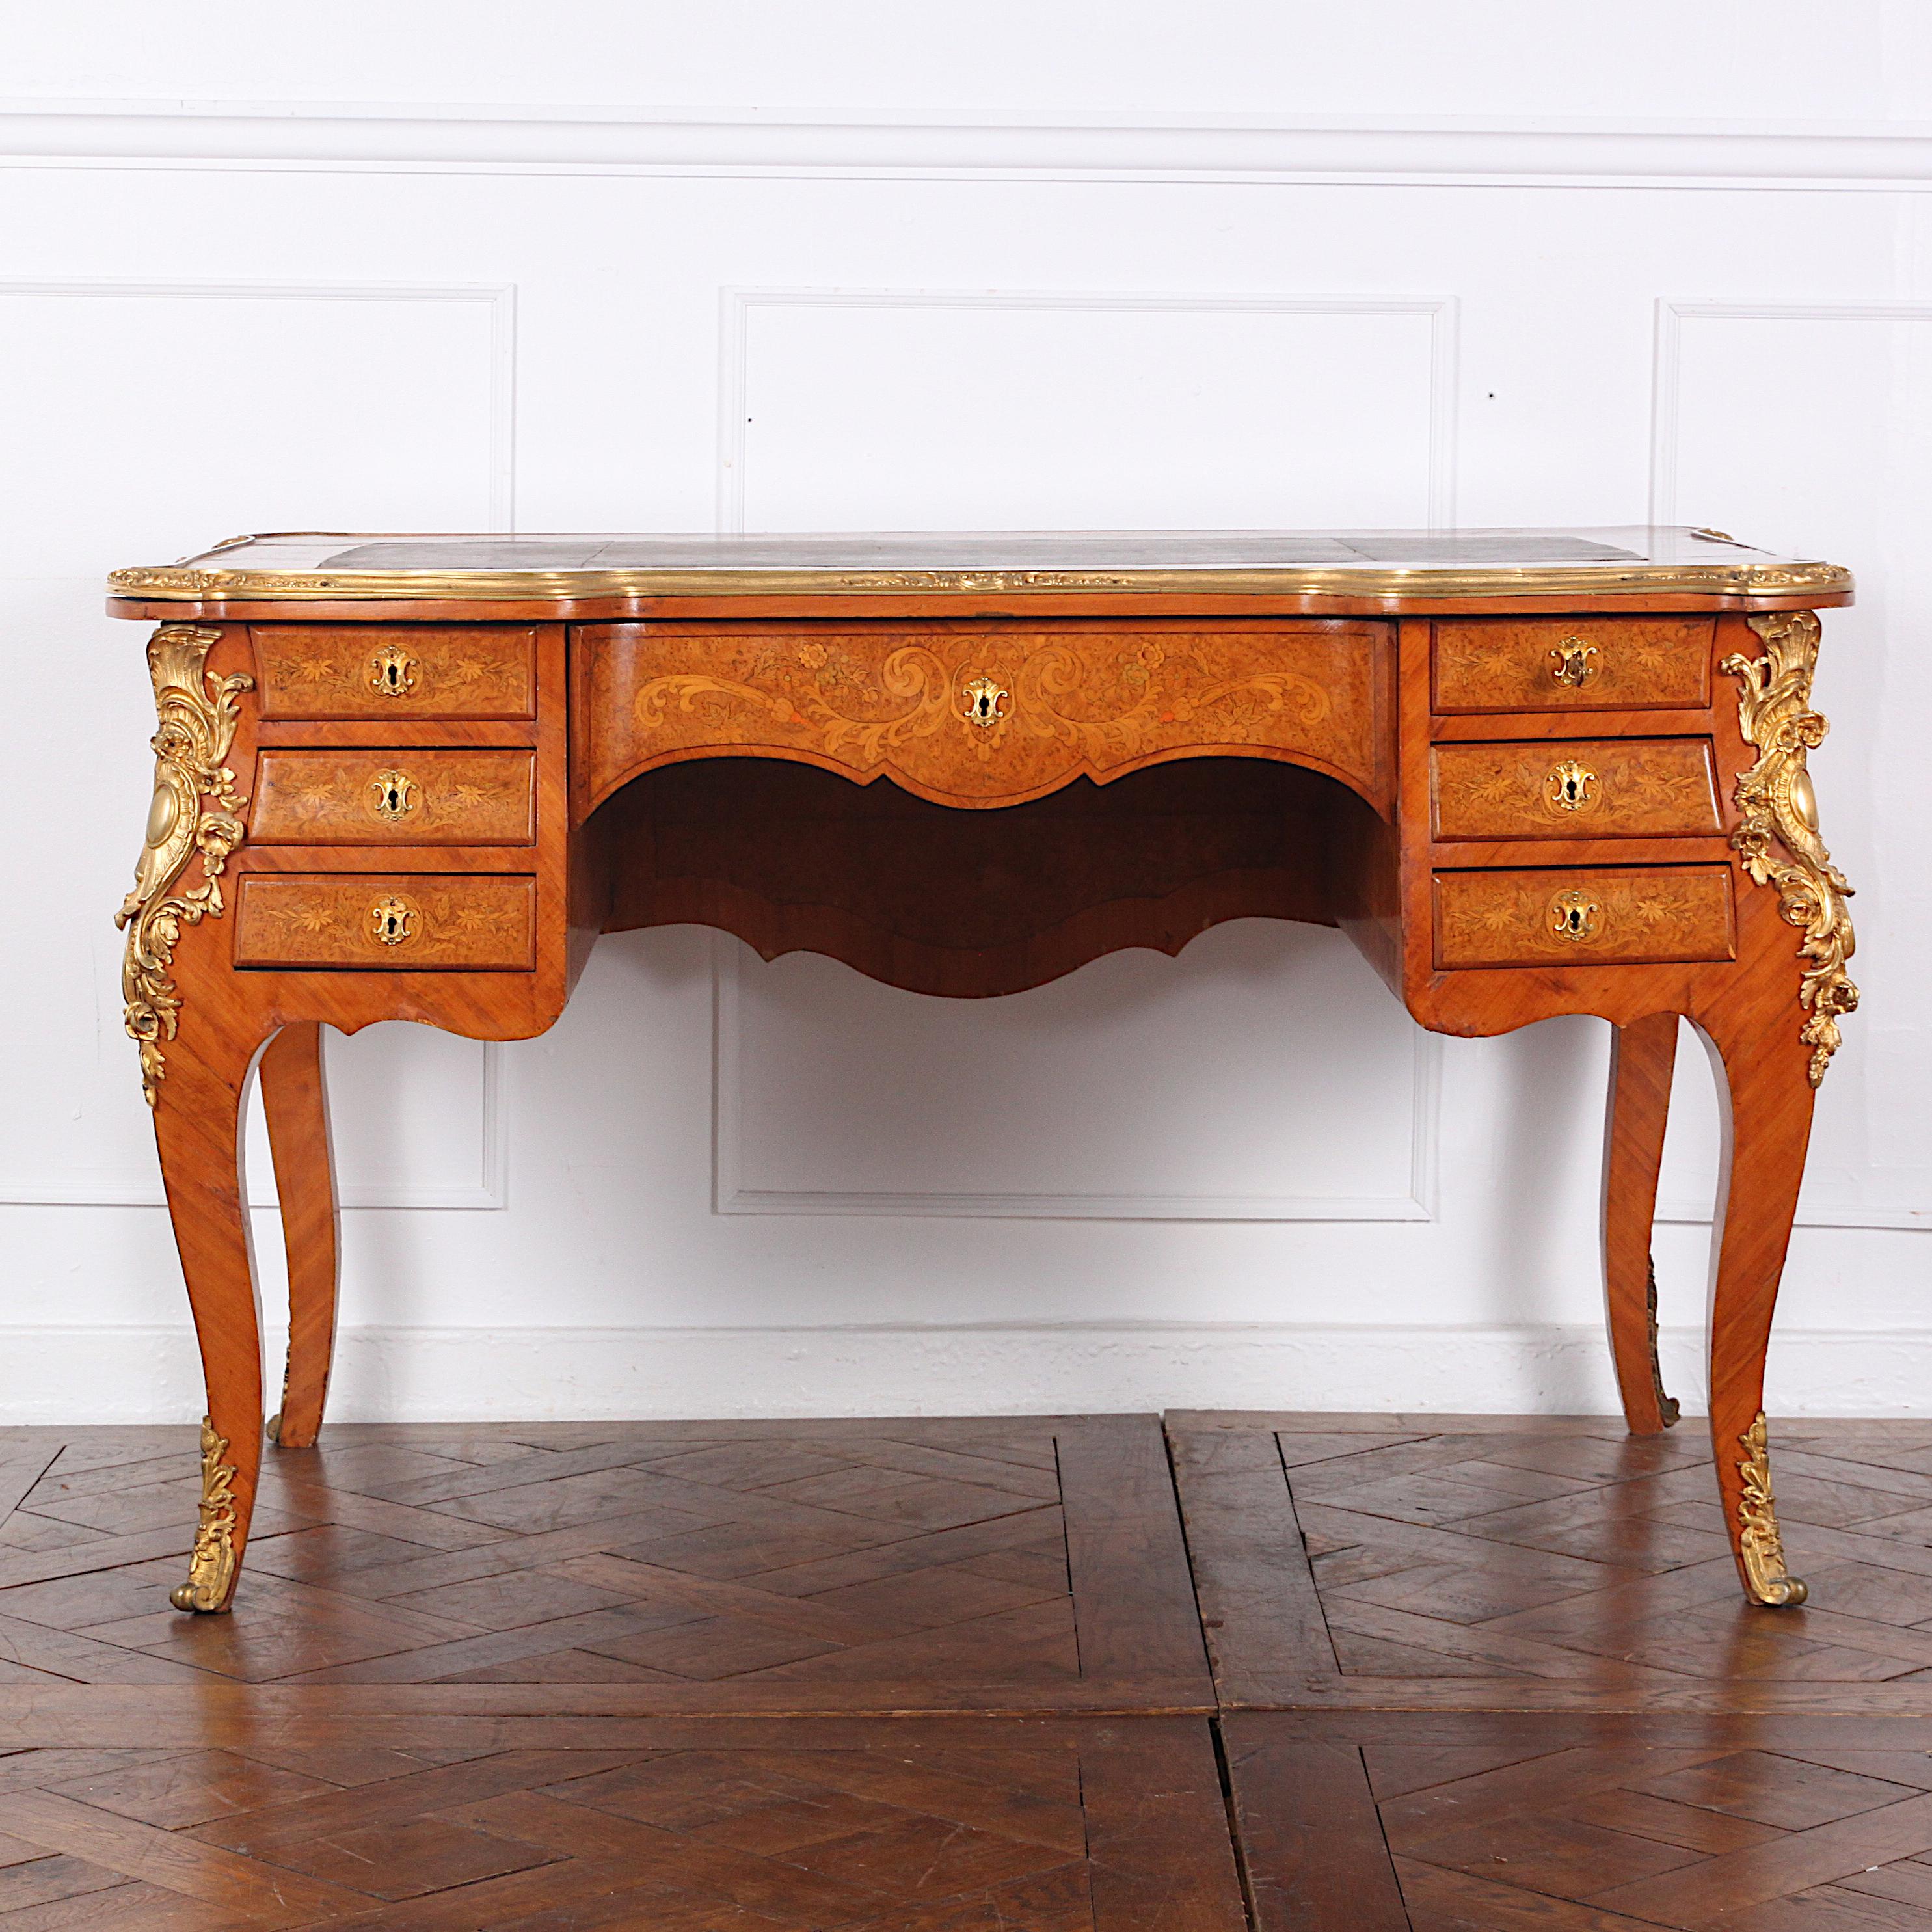 Highly inlaid French Louis XV style desk or ‘bureau plat’ in kingwood, bird’s-eye maple, burl walnut, fruitwood etc. Highly detailed floral marquetry panels to the sides and back with similar marquetry work to the seven-drawer fronts. The desk is